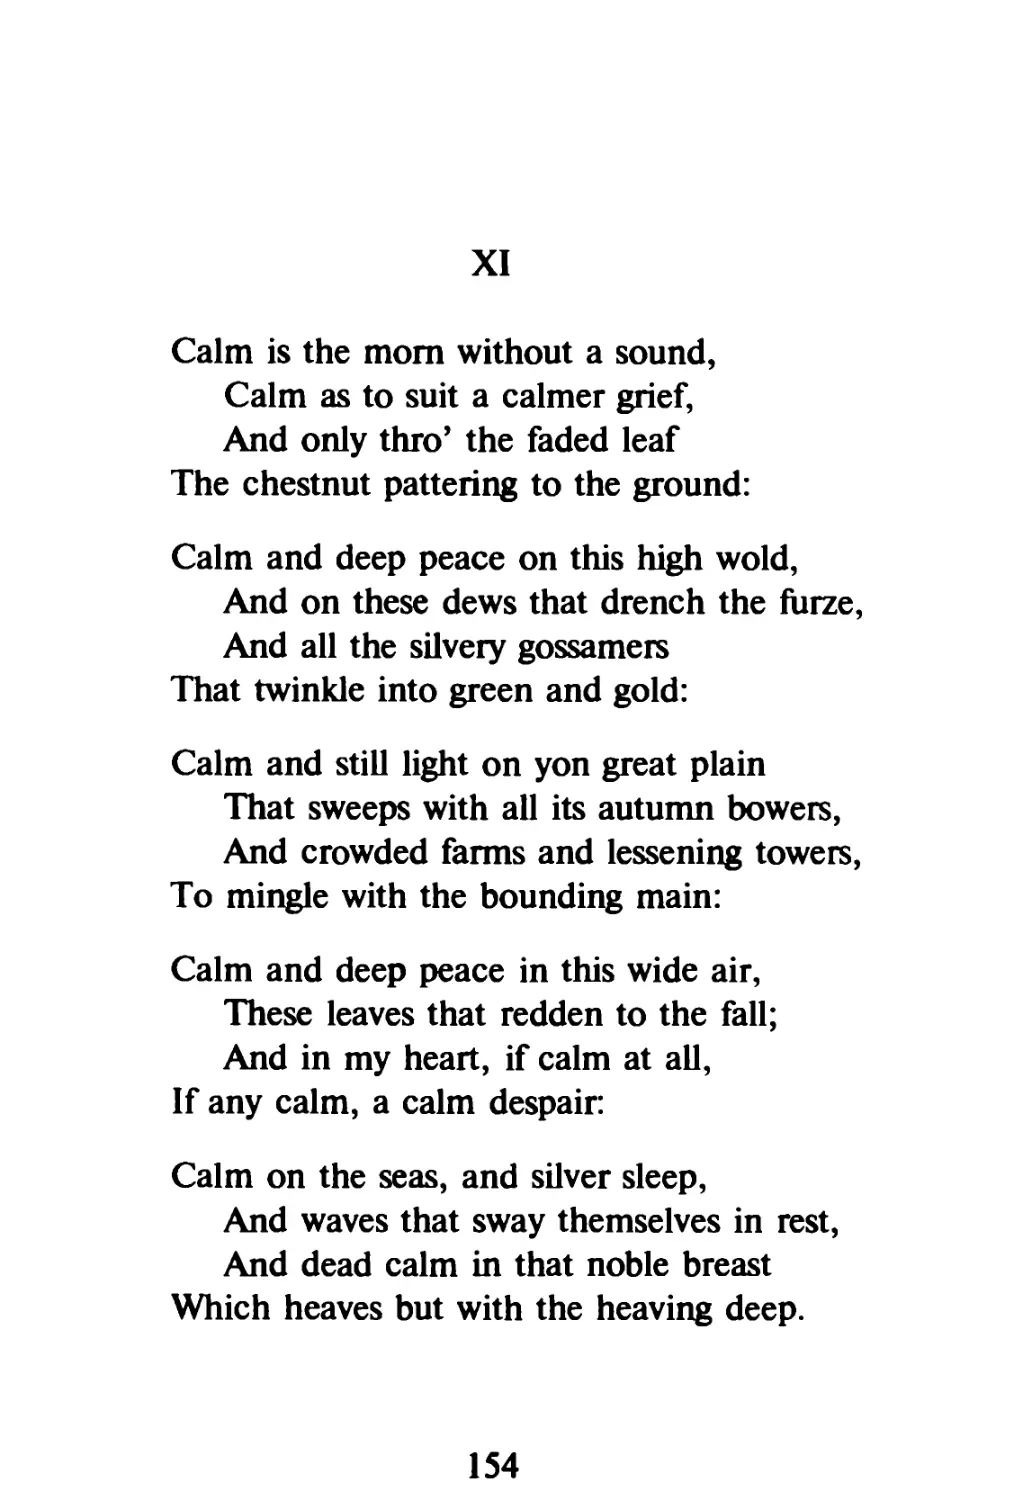 XI 'Calm is the morn without a sound...'